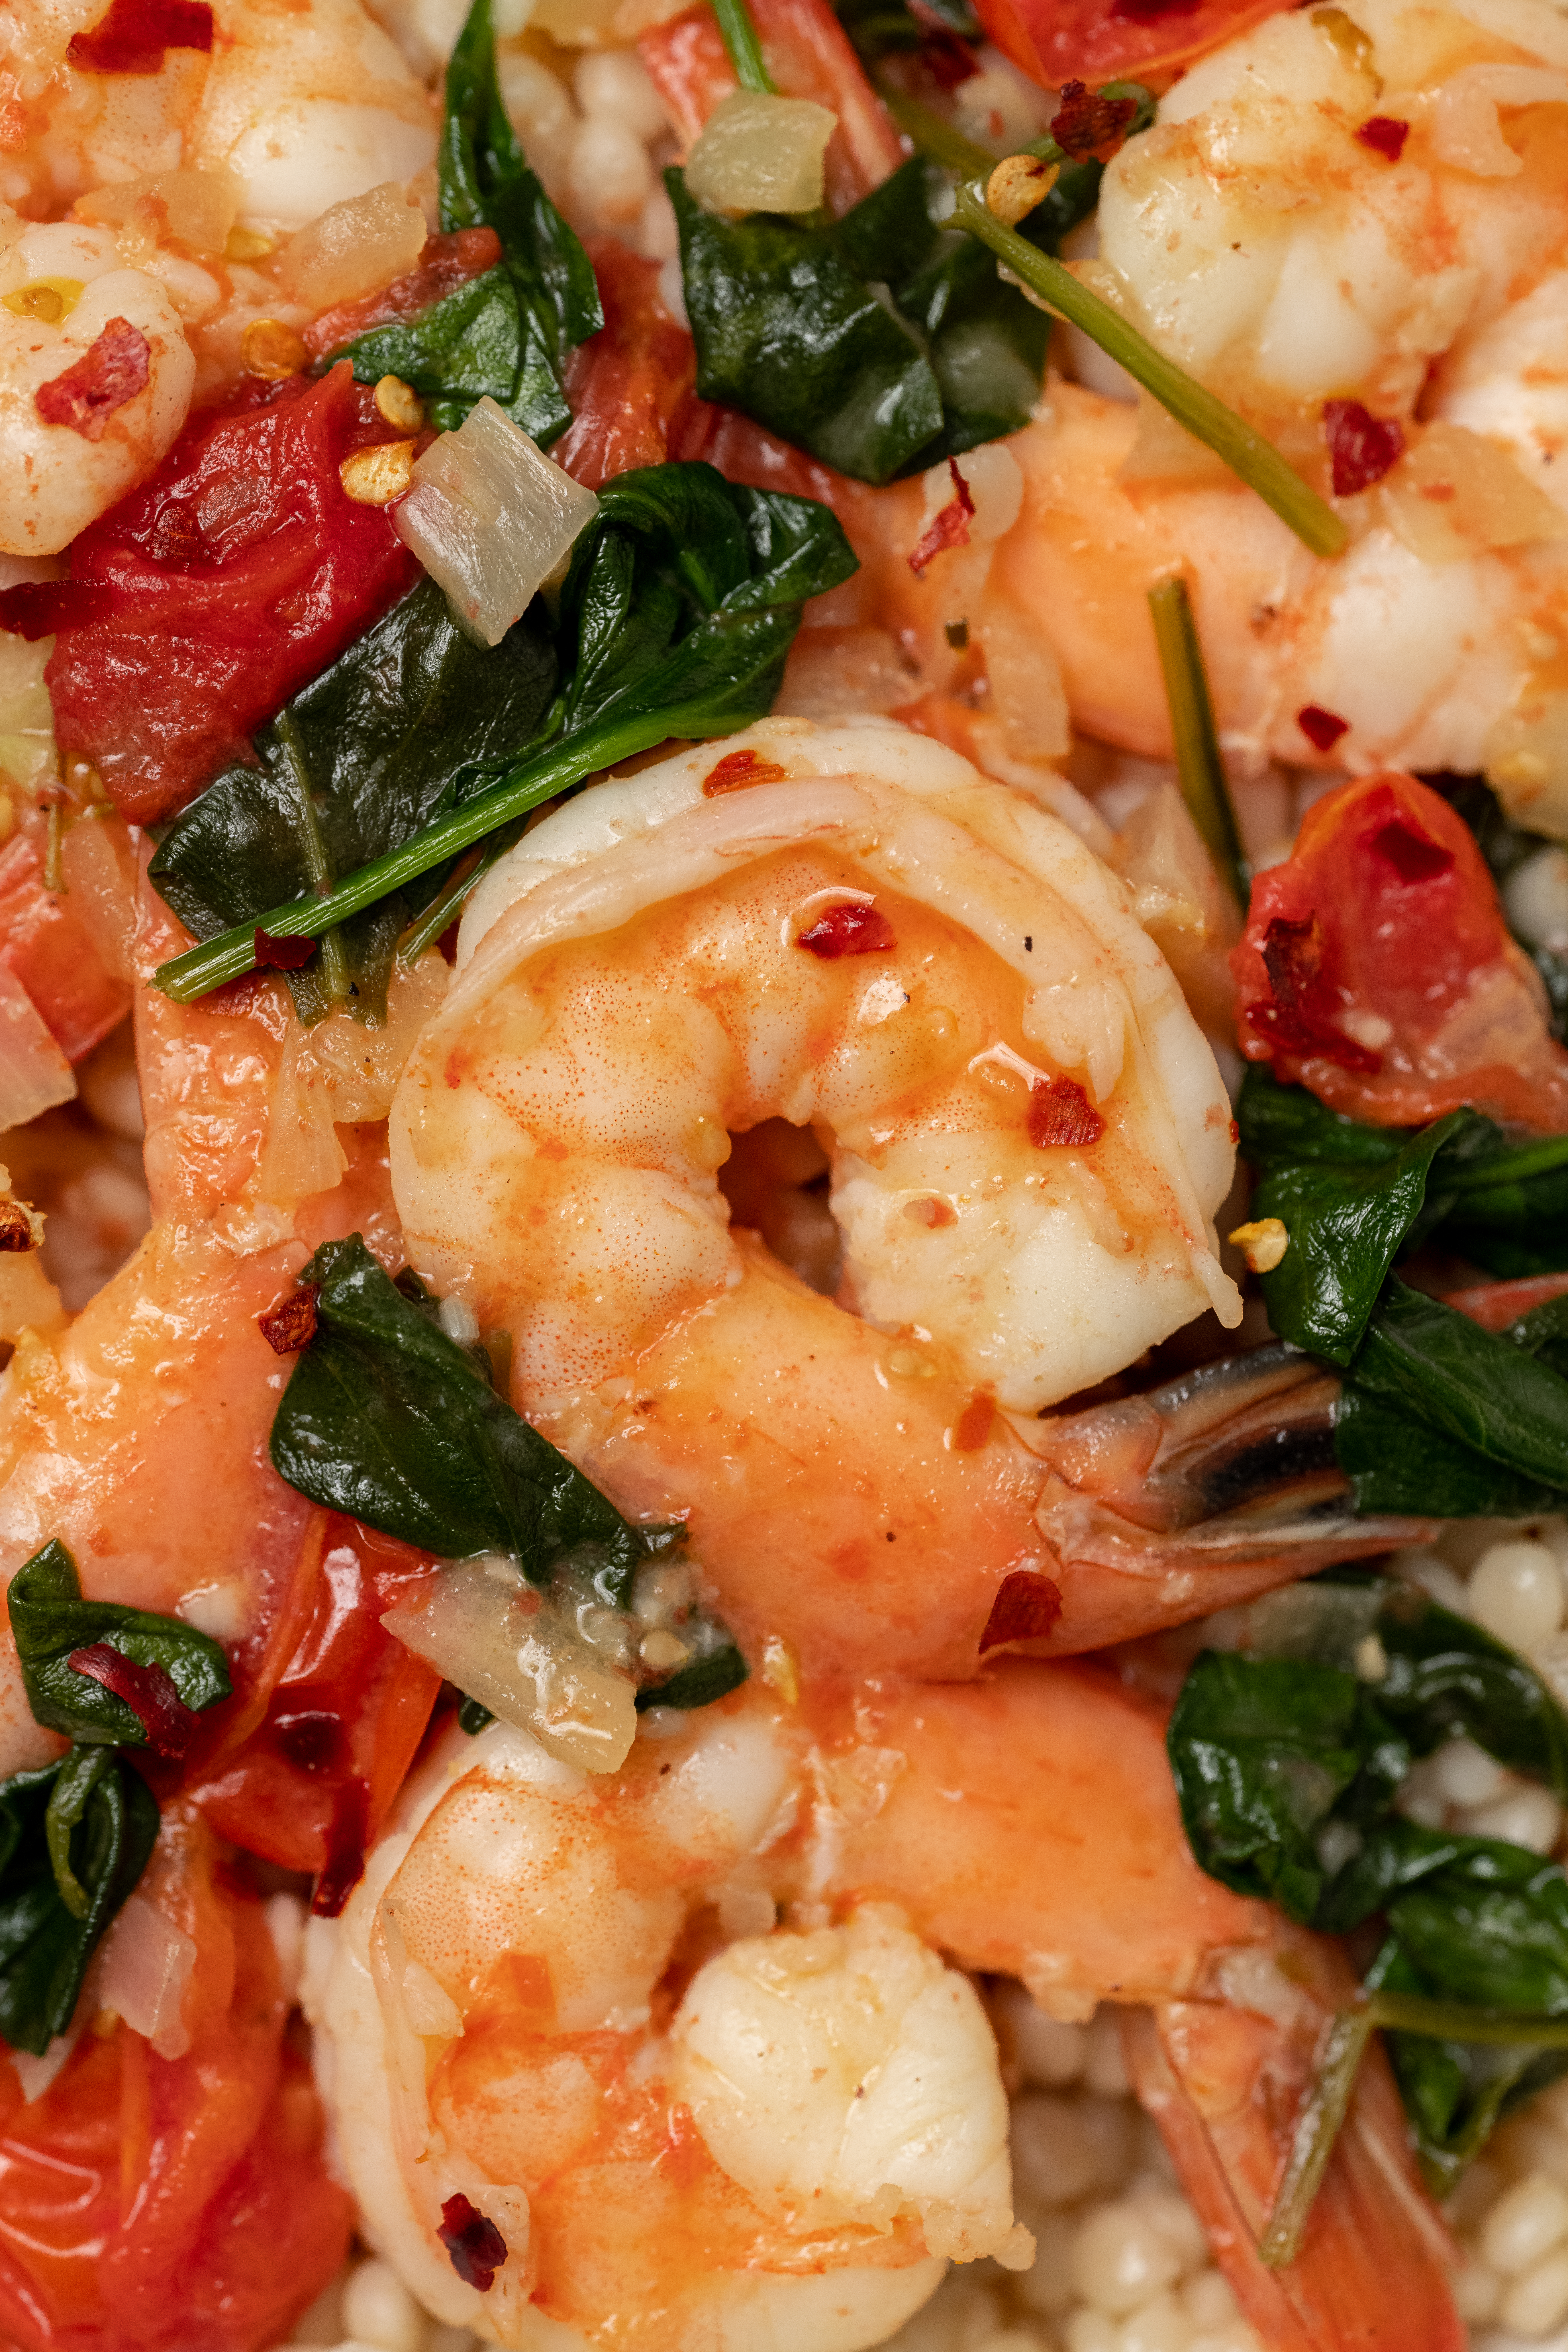 Shrimp, Spinach and Tomatoes in Lemon Garlic Cream Sauce with Couscous